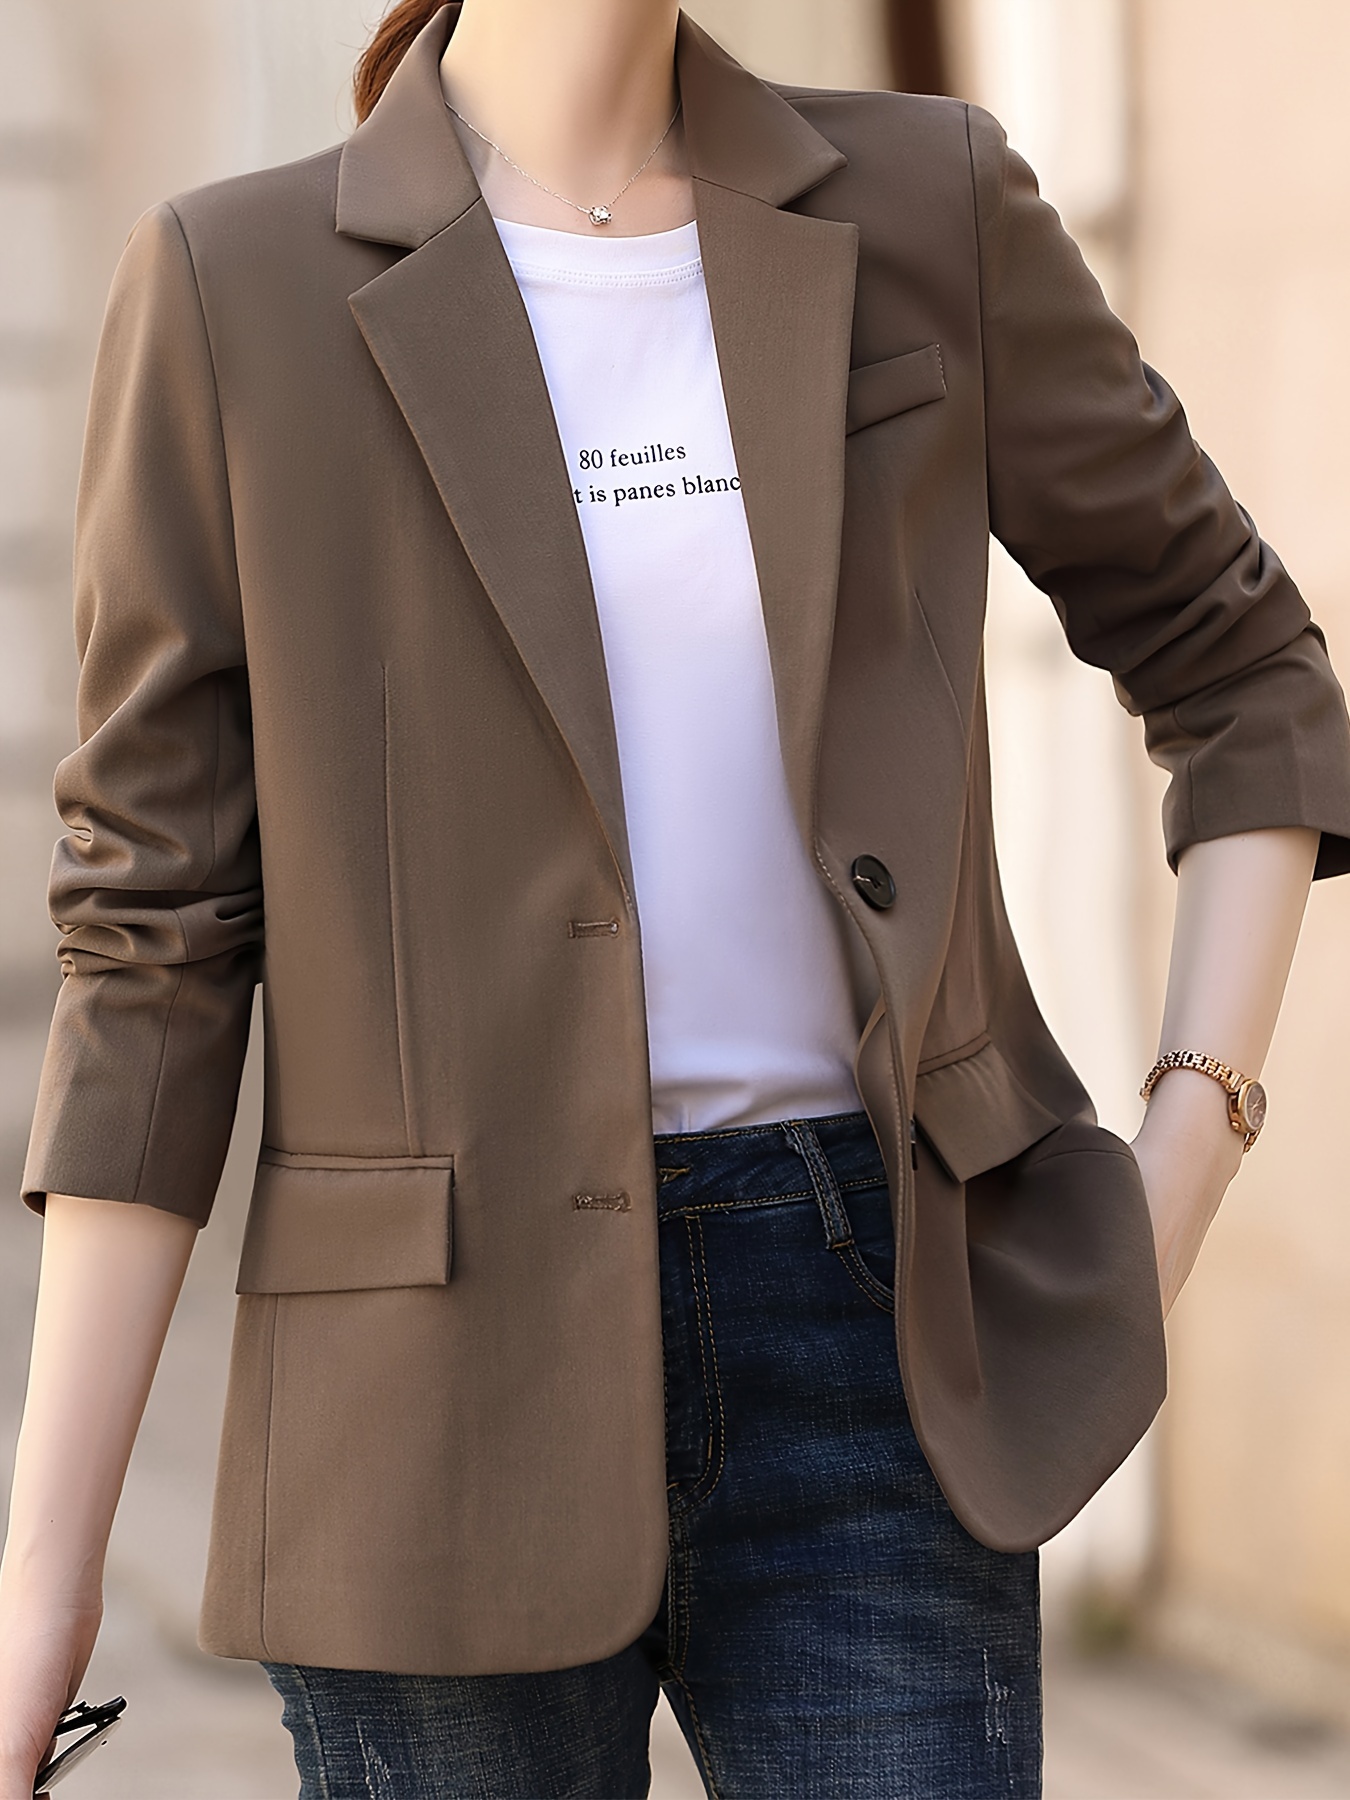 Single Breasted Lapel Neck Blazer, Casual Solid Long Sleeve Blazer For Office & Work, Women s Clothing details 1